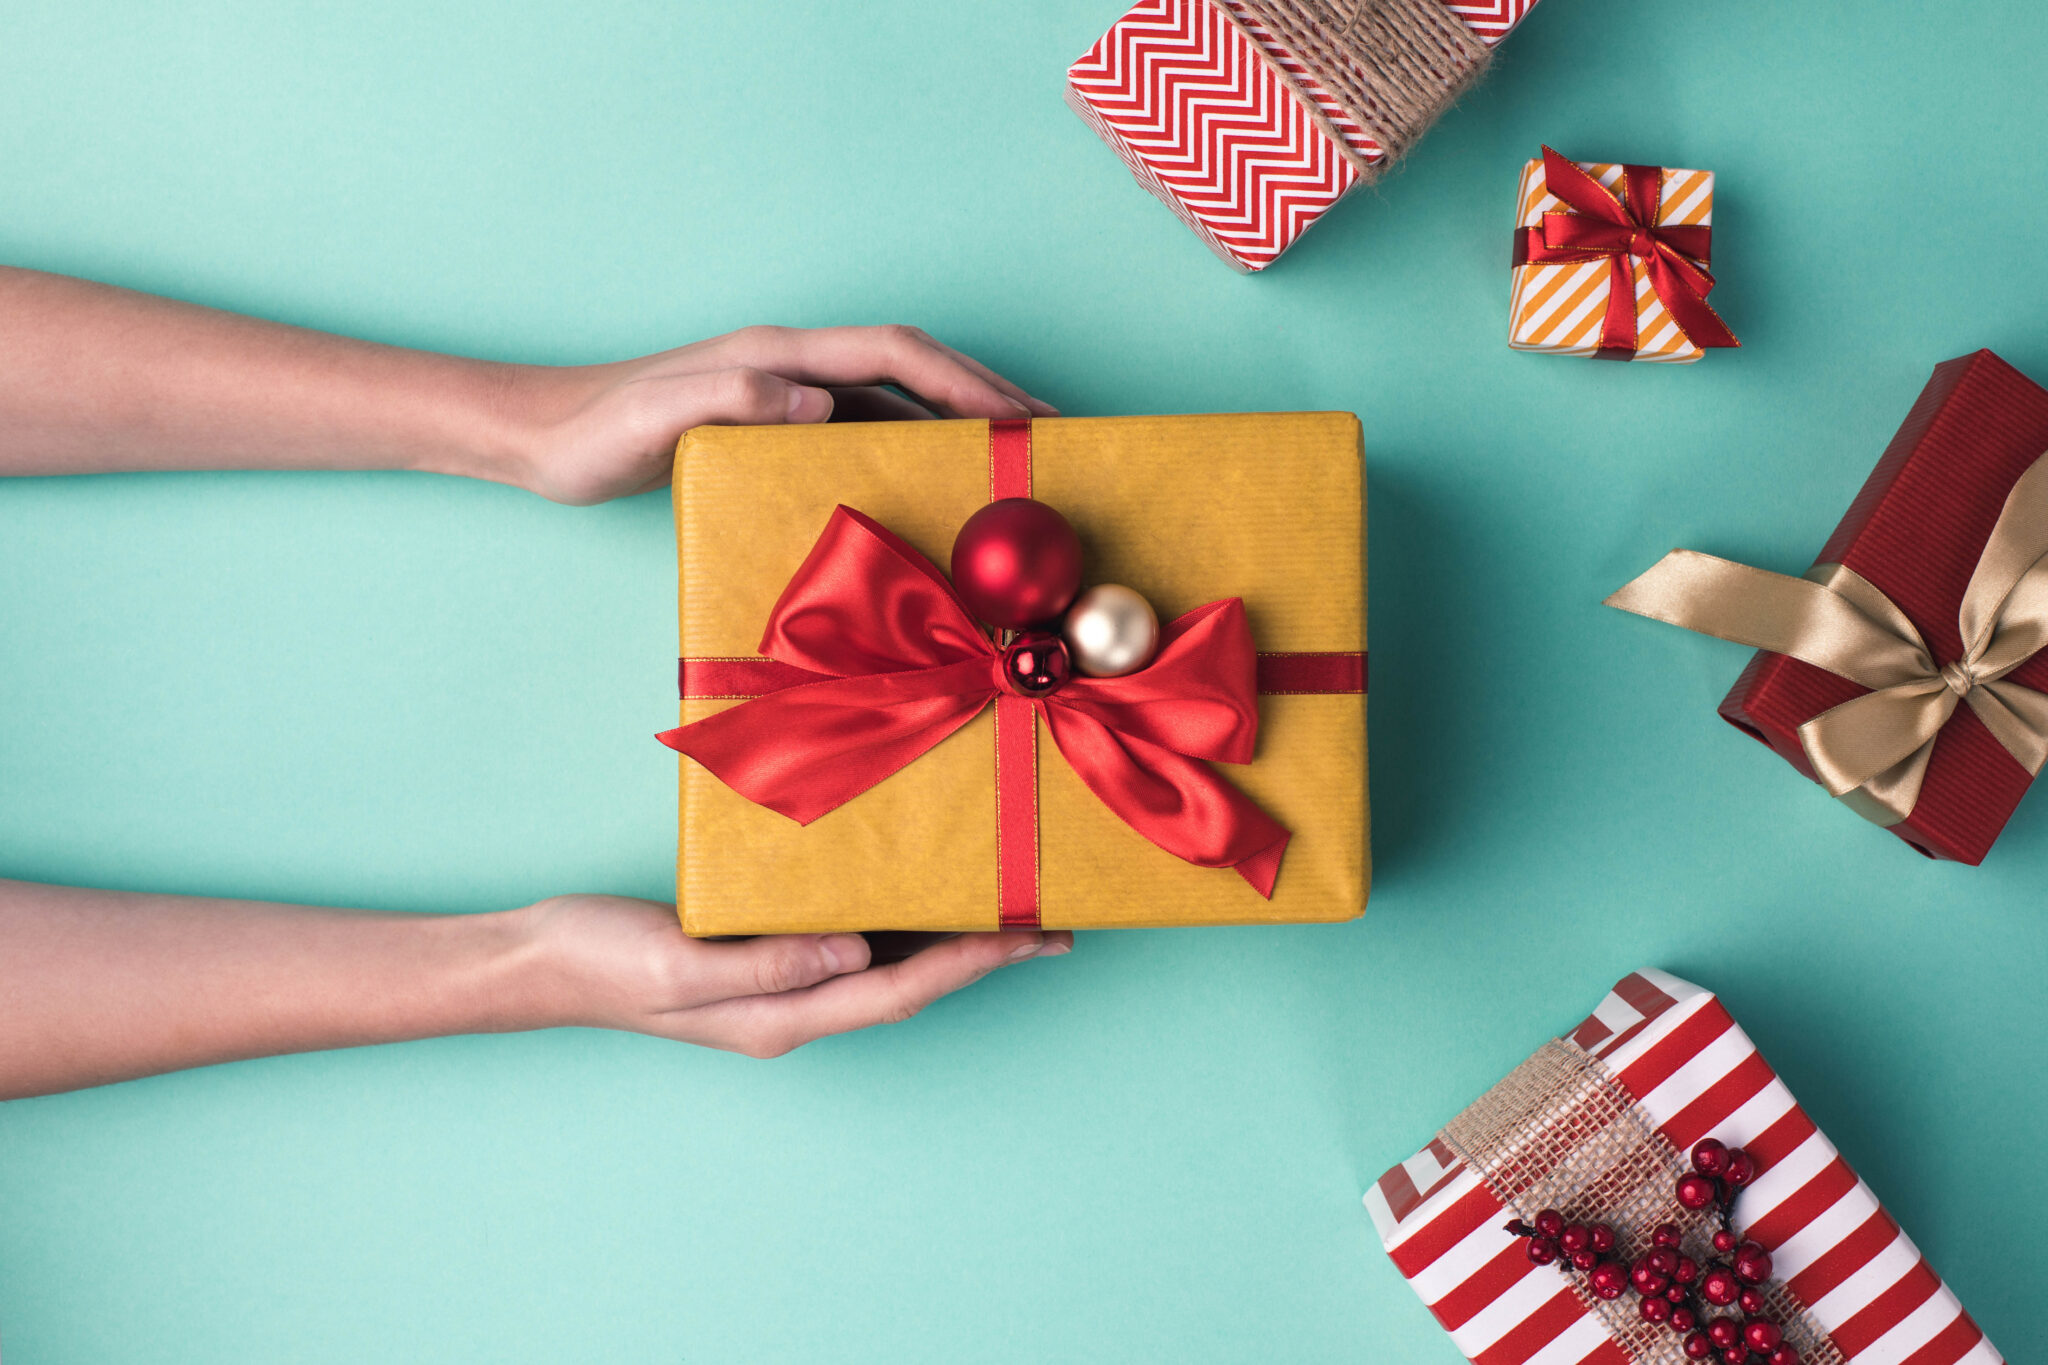 The 10 Best Personalized Christmas Gift Ideas for Friends